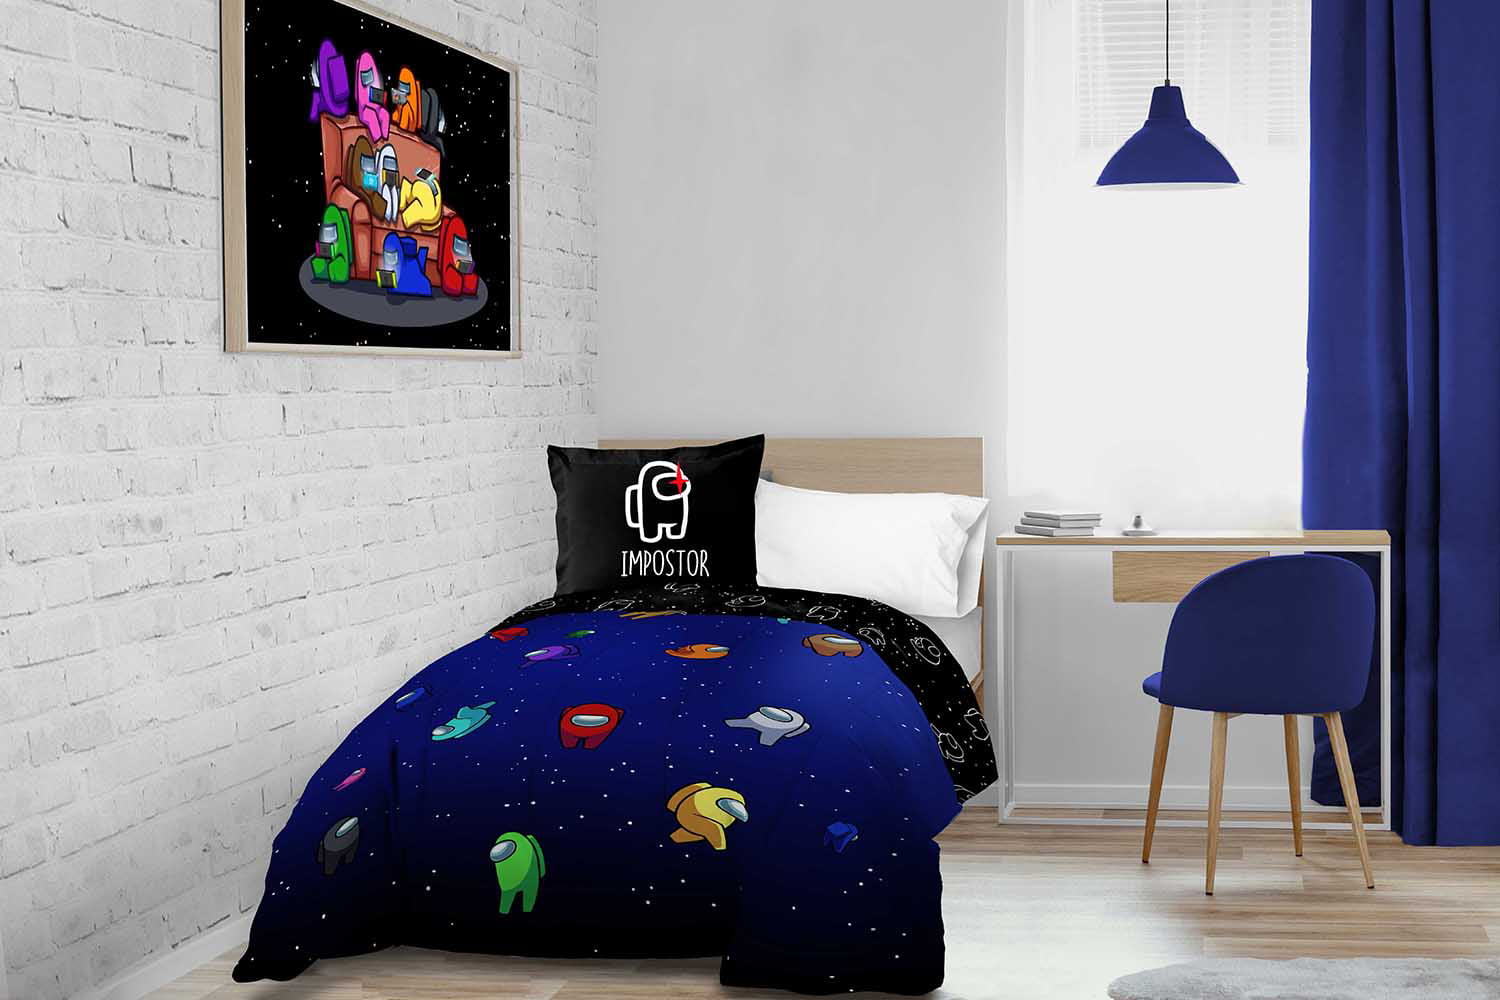 1Duvet Cover +1 Pillowcase Among Us Bedding Twin Set Imposter Game Theme Duvet Cover,2 Piece Among Us Game Bed Set for Kids Teens Boys Girls Bedroom Decor Birthday Gift